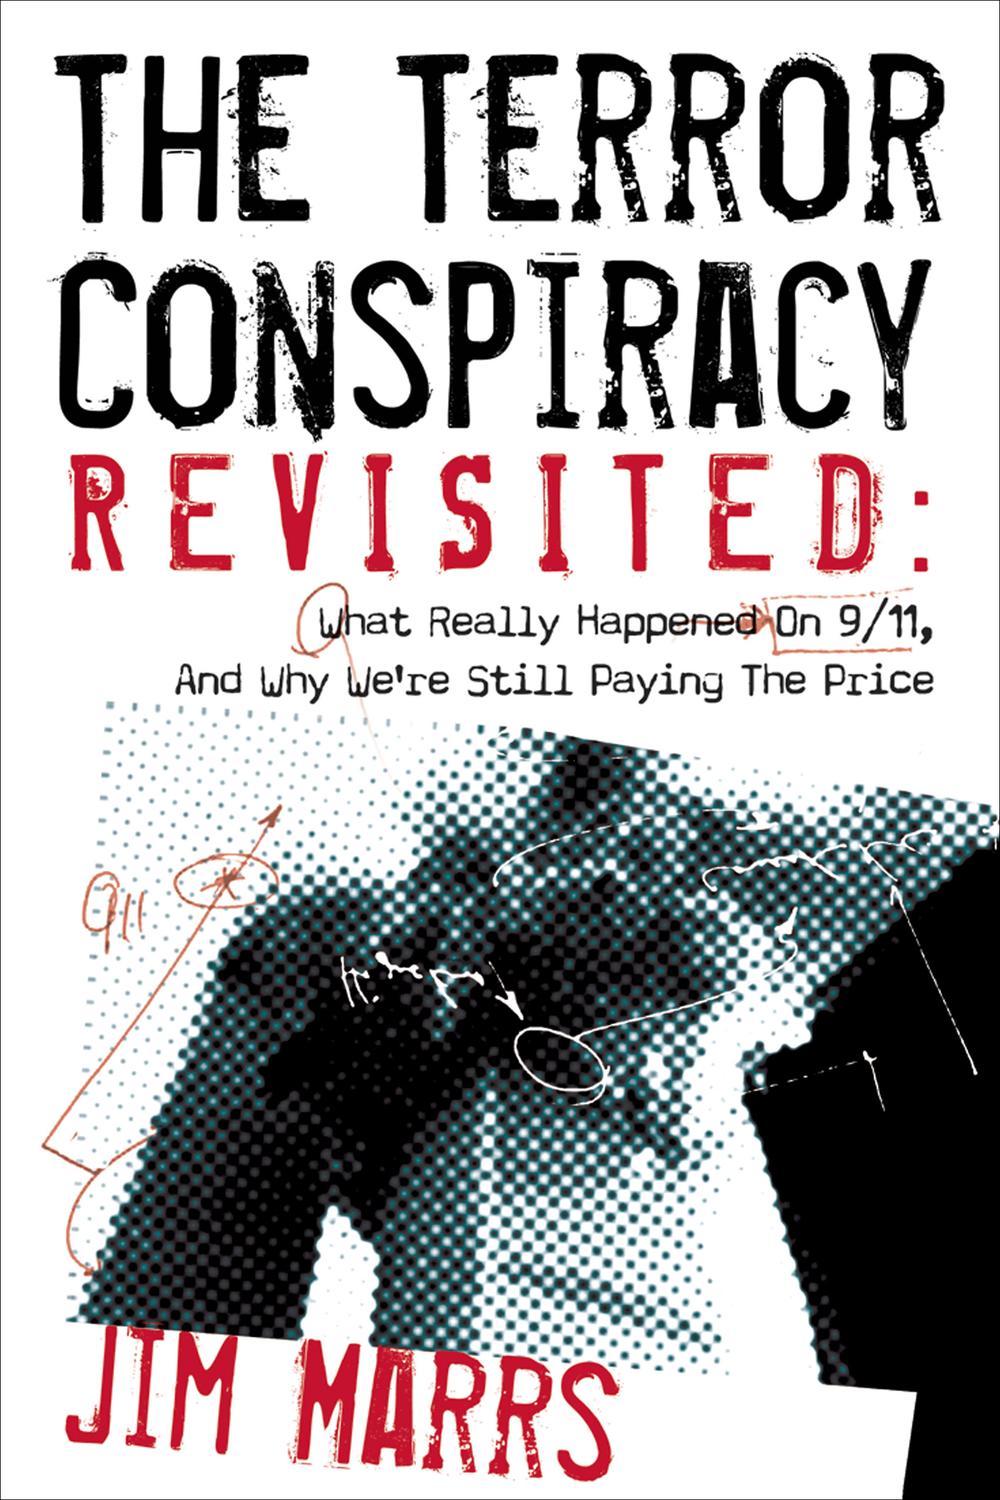 The Terror Conspiracy Revisited - Jim Marrs